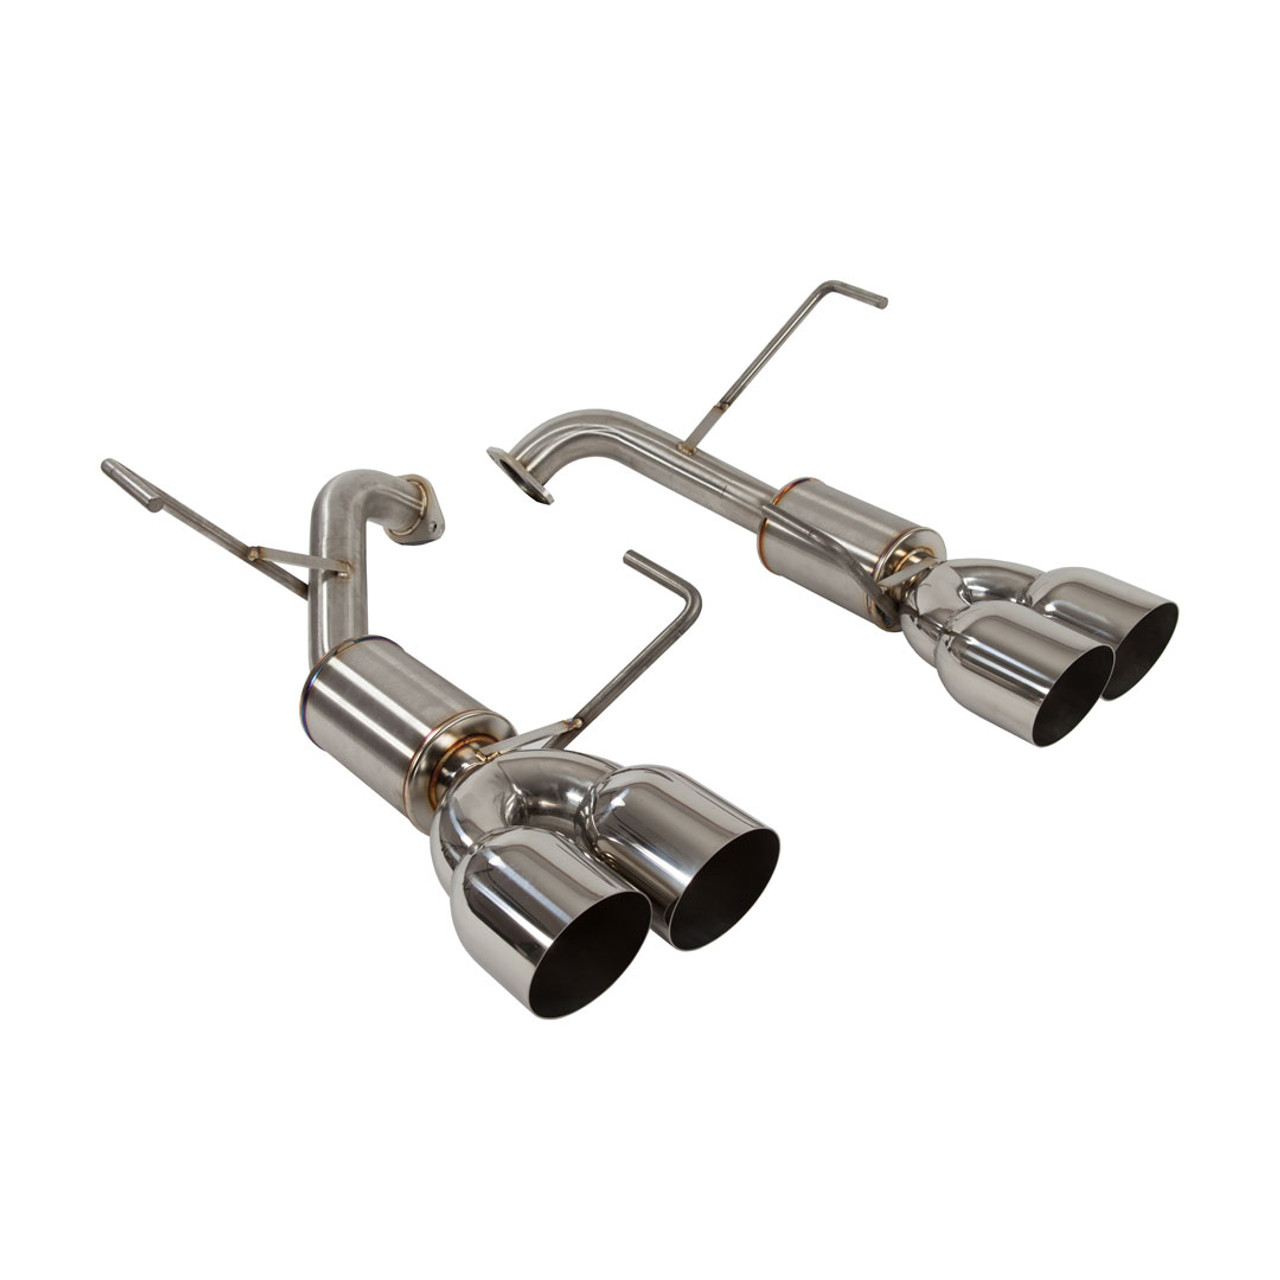 Nameless Performance Catback Exhaust with 5 inch muffler and 4 inch single wall exhaust tips